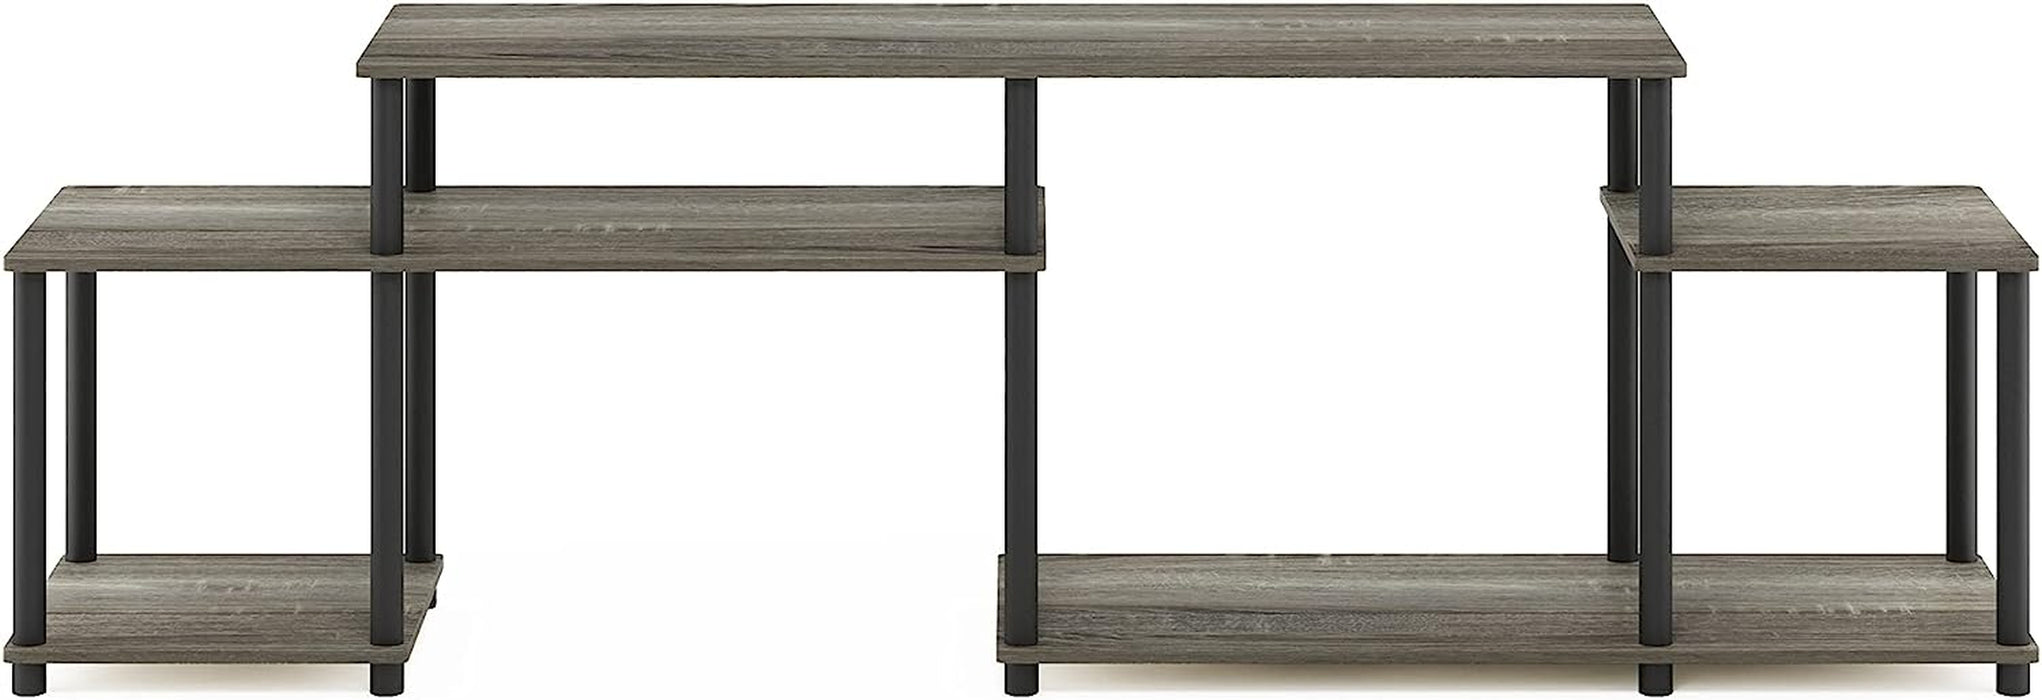 French Oak TV Stand for 55 Inch